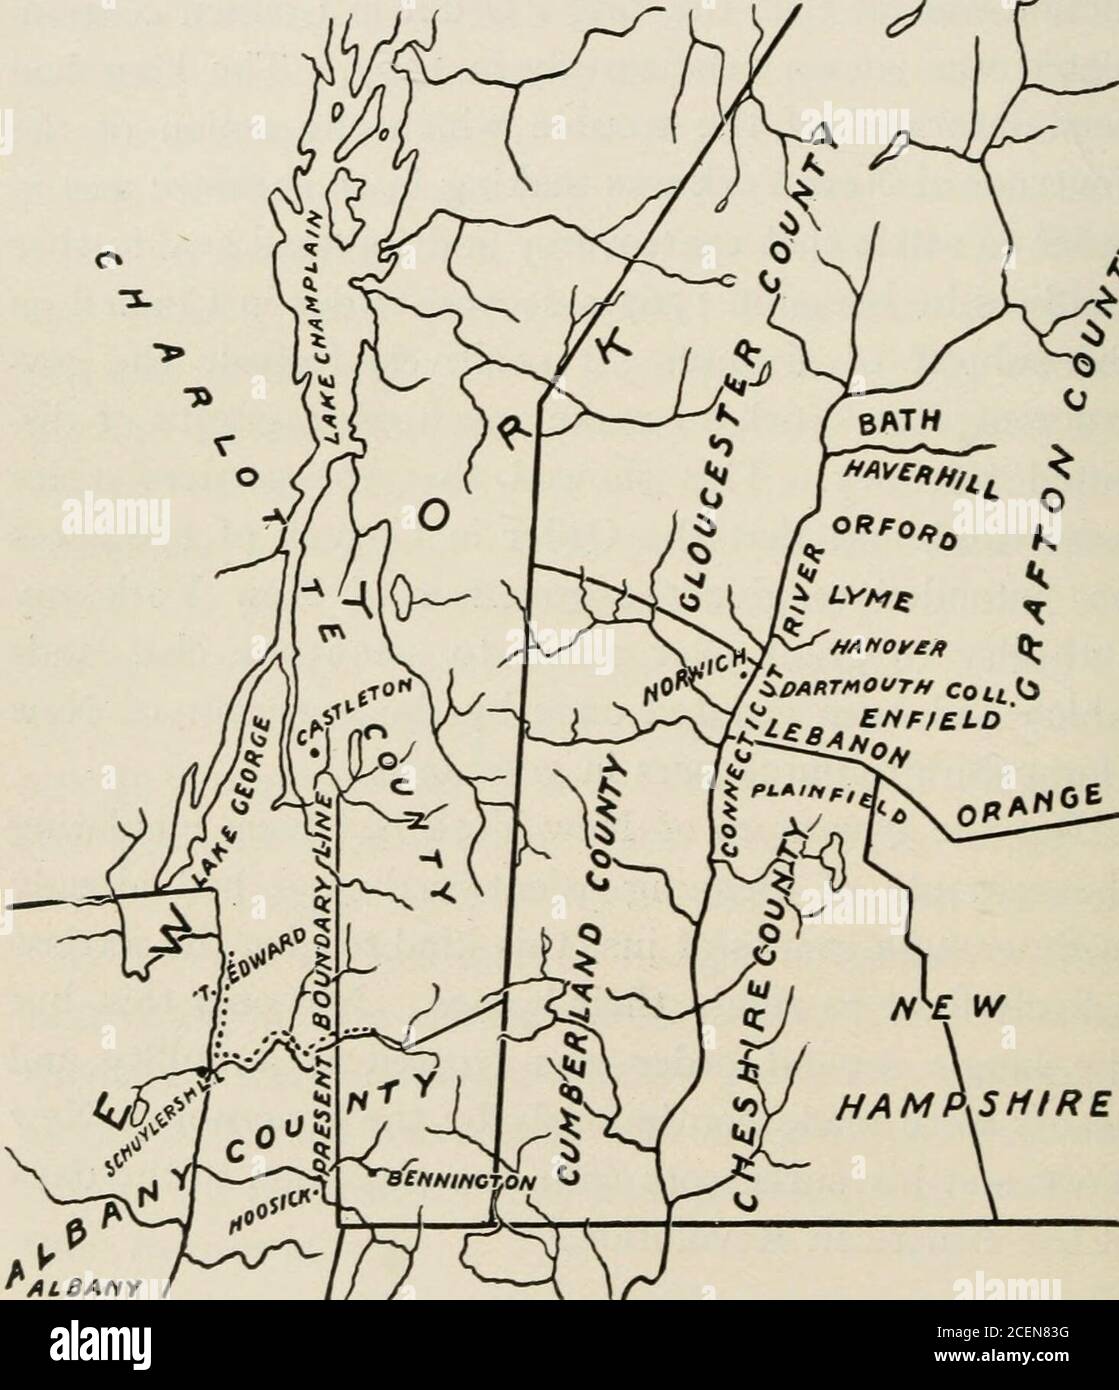 . A history of Vermont, with the state constitution, geological and geographical notes, bibliography, chronology, statistical tables, maps, and illustrations. of New York anyauthority to grant over again to some one else landswhich had been granted once by the governor of NewHampshire to purchasers in good faith. But the governors of New York had been emulatingthe example of Benning Wentworth and had alreadymade enough grants of just this kind to give the settlersa lively fight to retain their homes. Not only this, butthe kings second order was treated as a nullity andgrants were made continuo Stock Photo